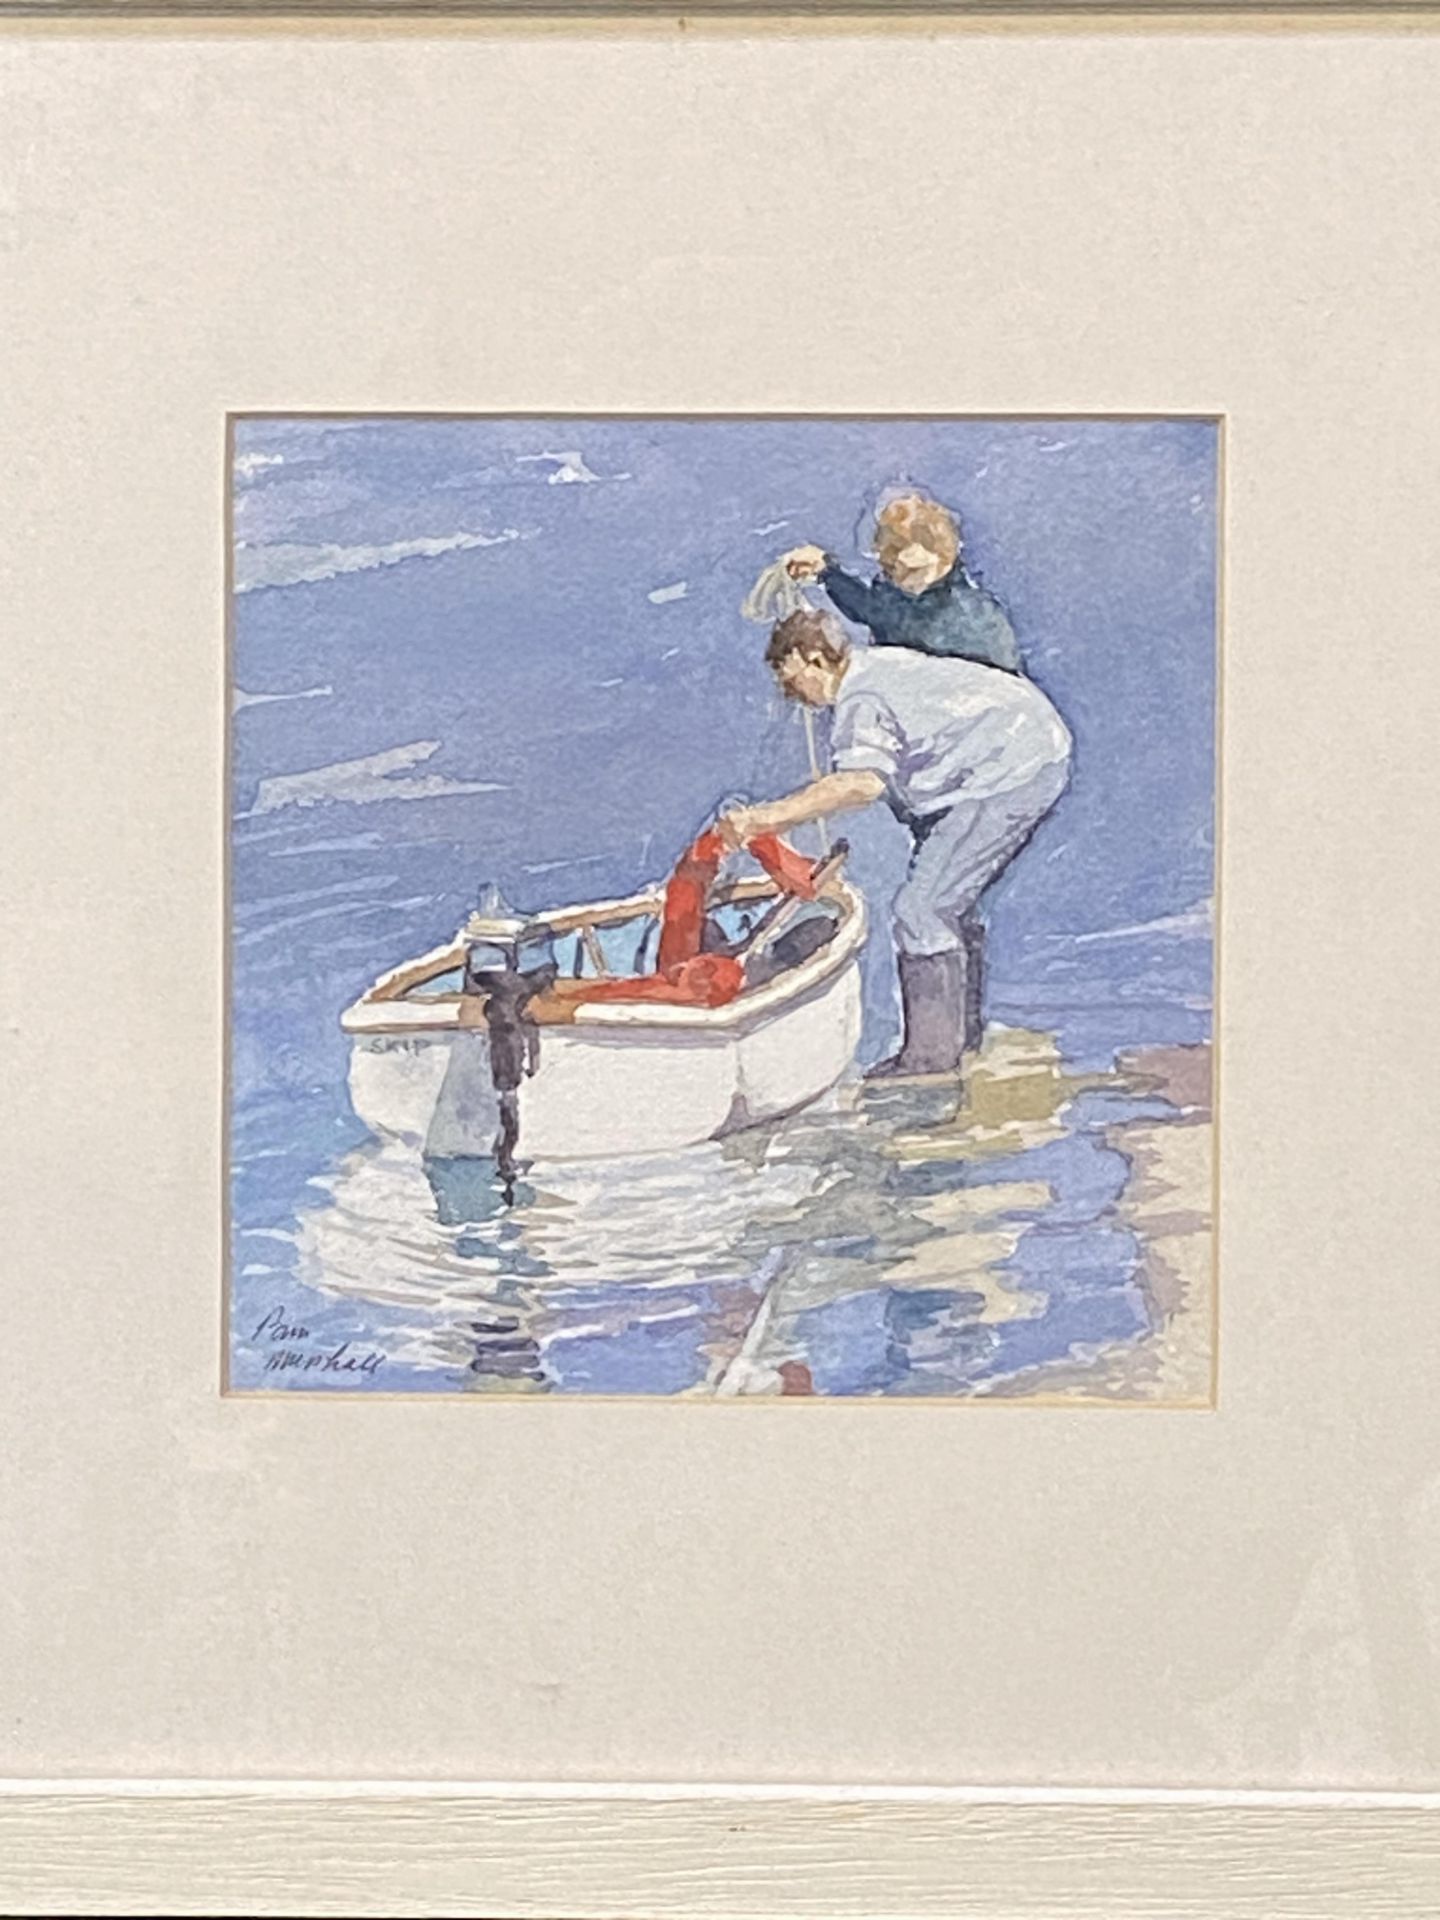 Framed and glazed watercolour "Putting to Sea", signed Pam Marshall - Image 3 of 3